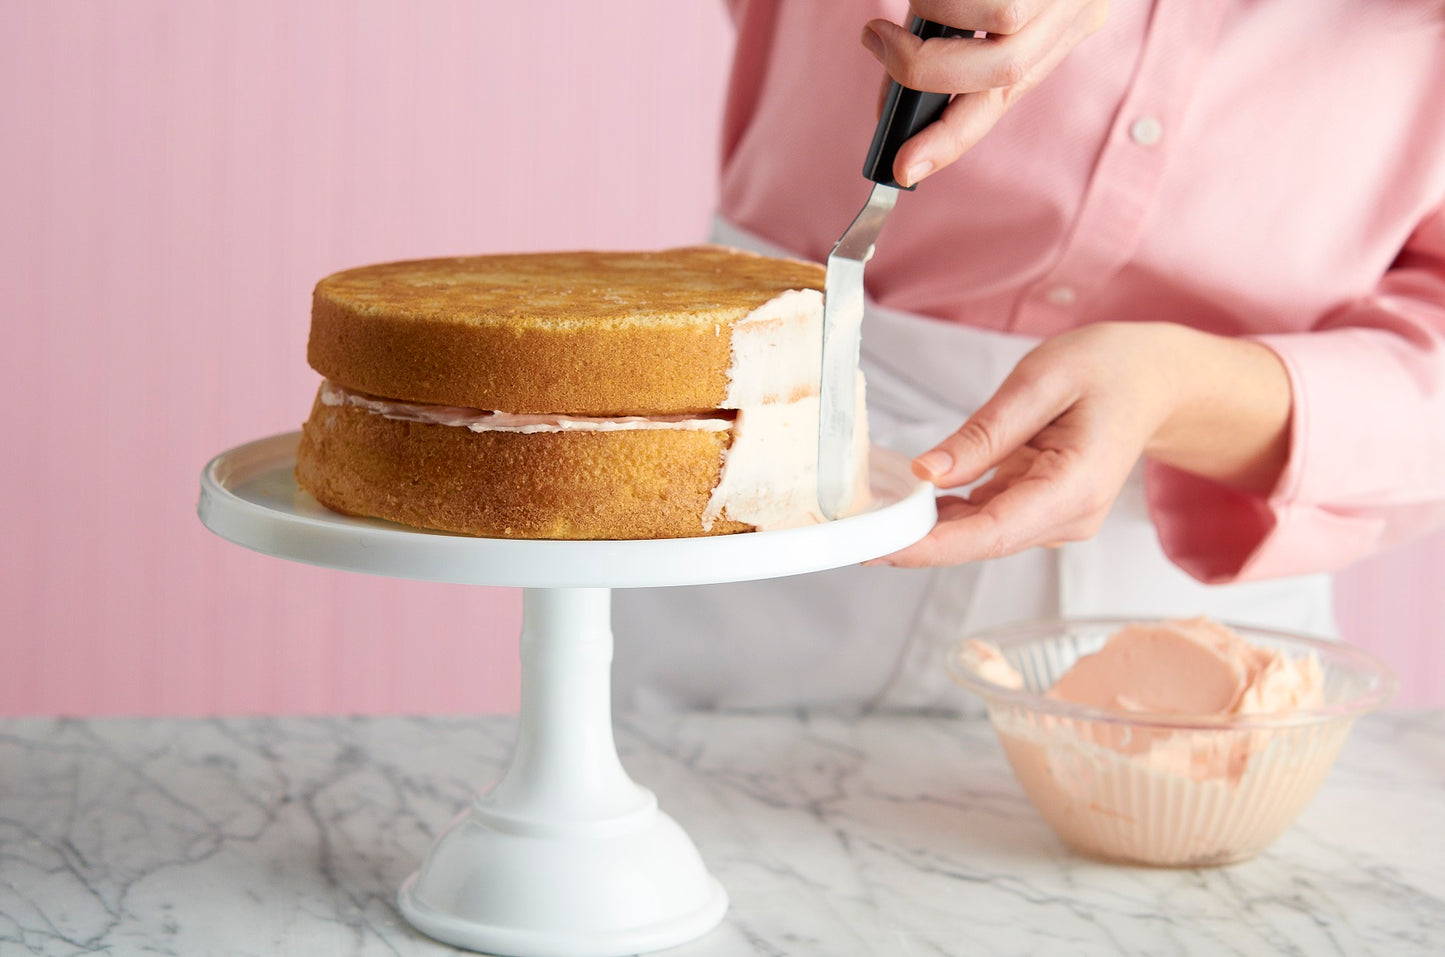 Cake Decorating Lessons: One on One